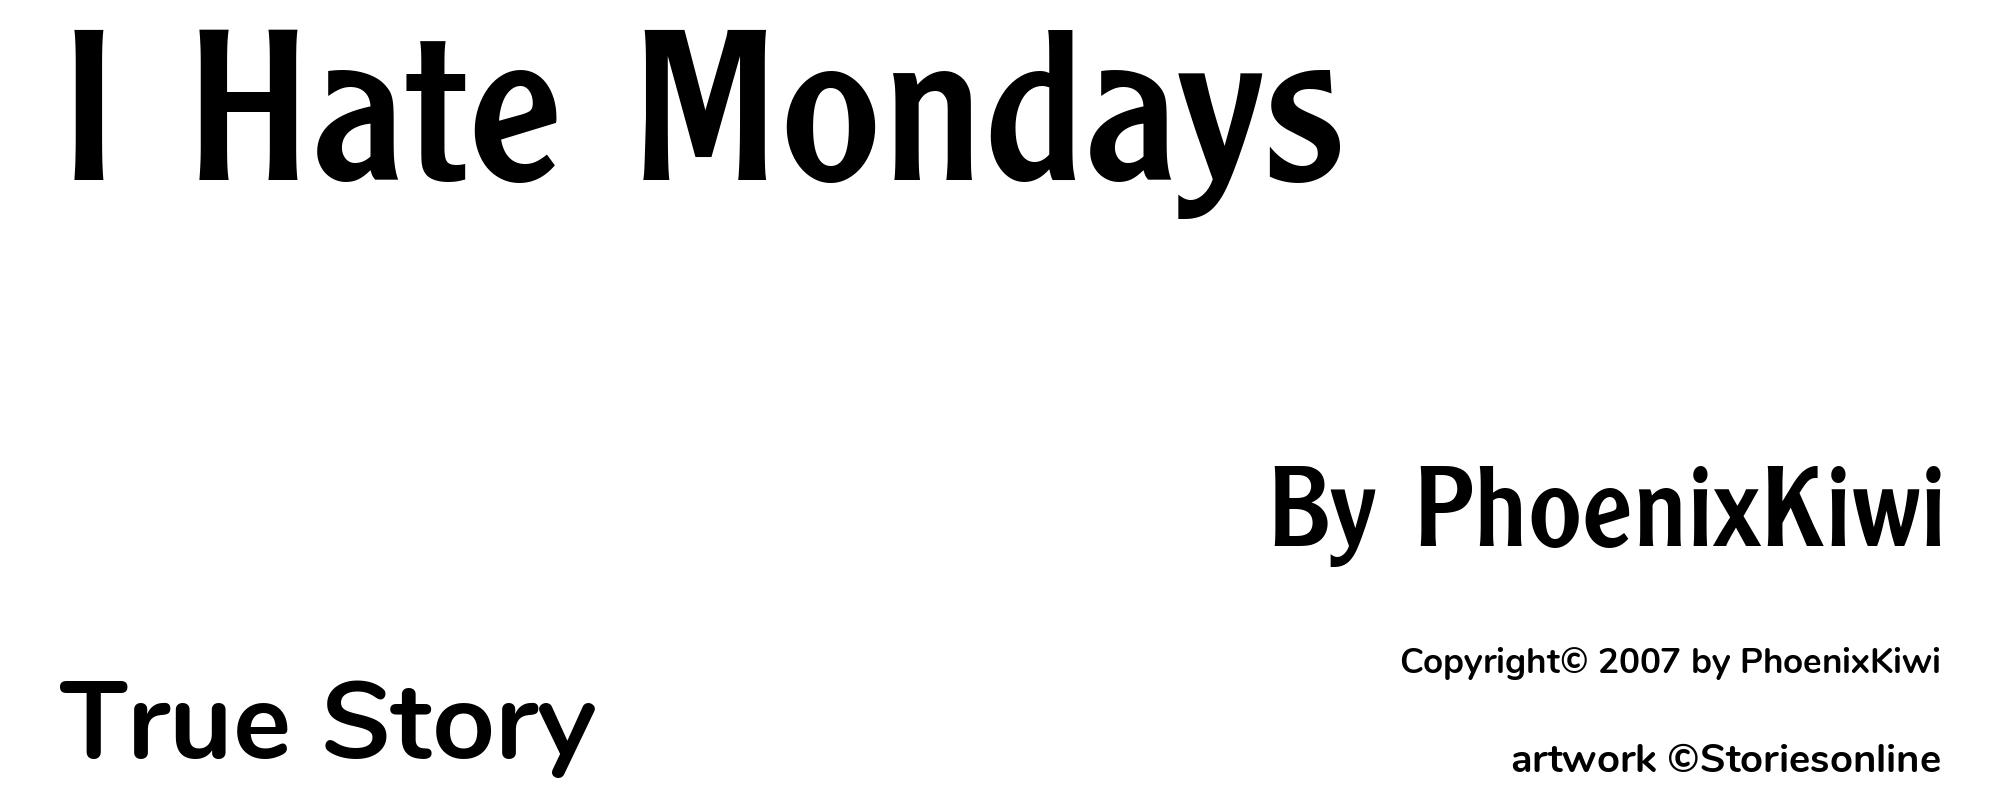 I Hate Mondays - Cover